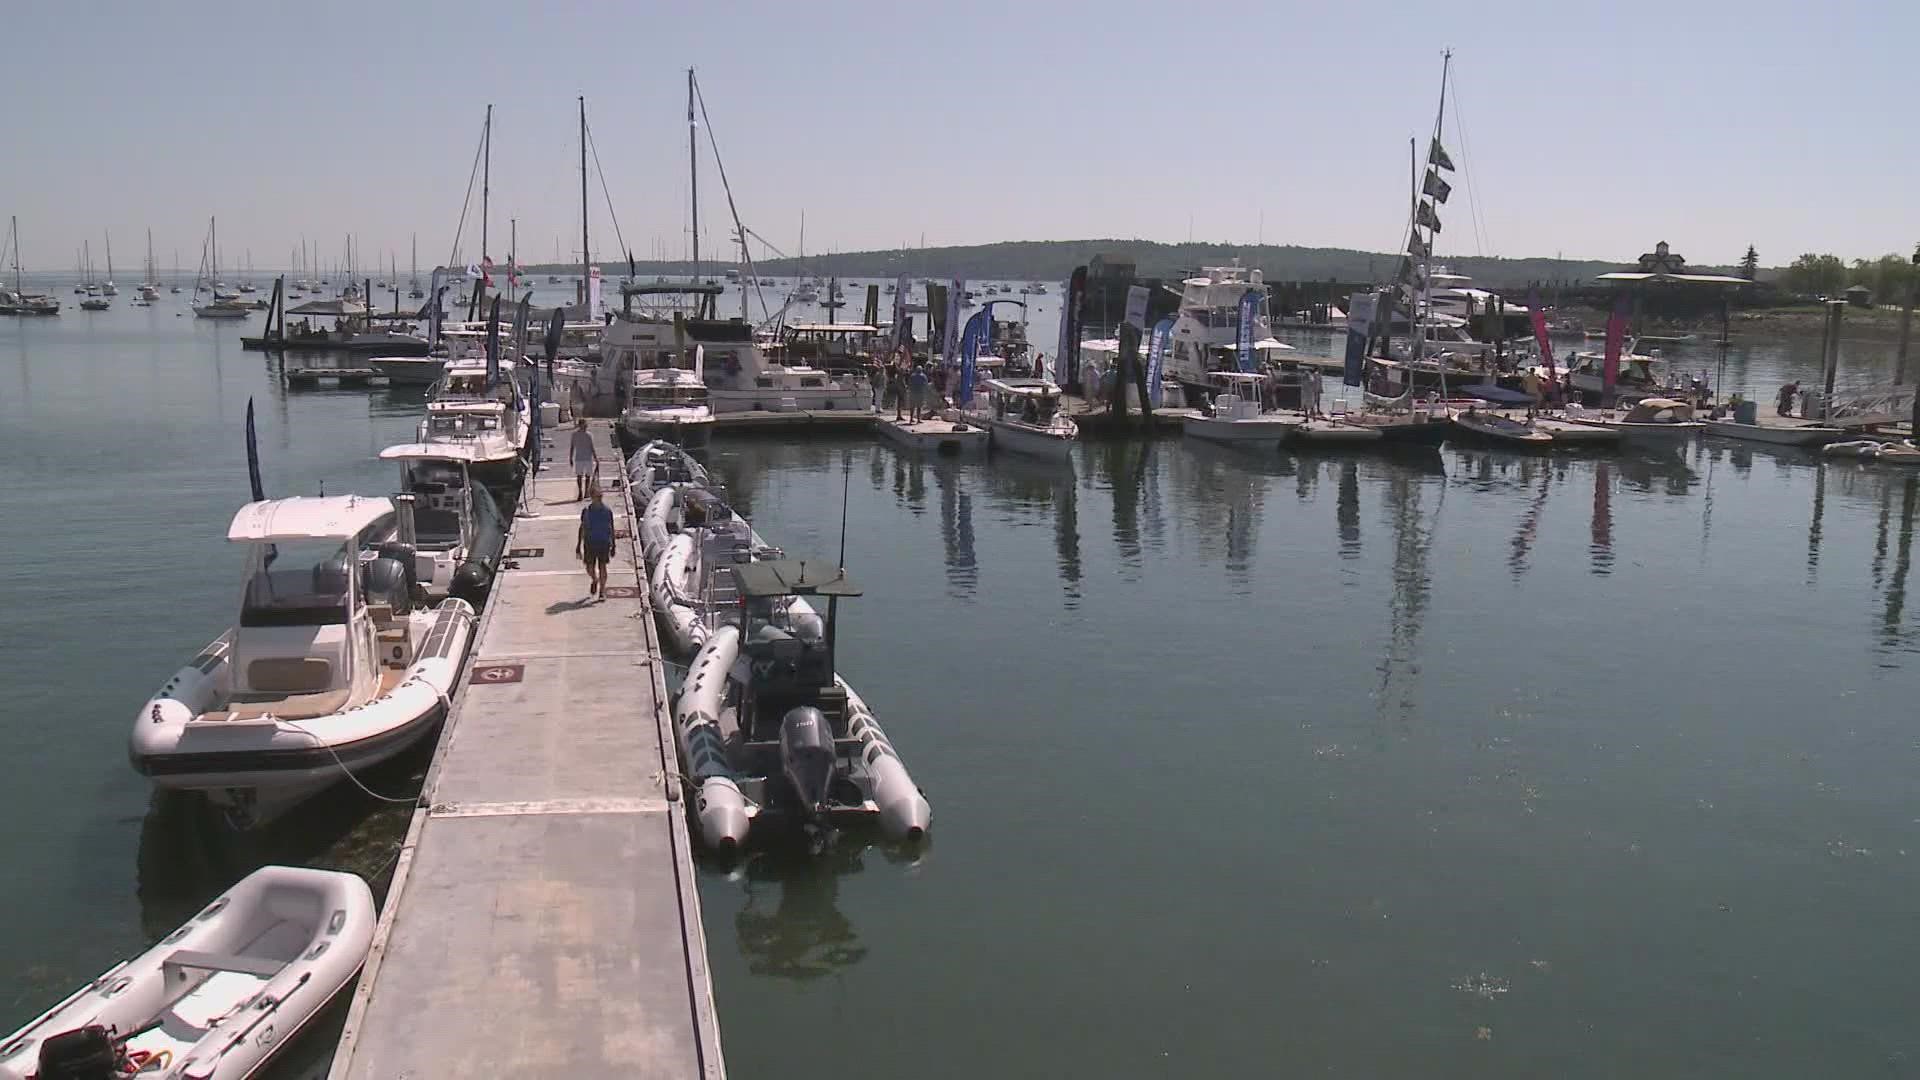 Organizer John Hanson, whose magazine puts on the show, says interest in boating has been big.